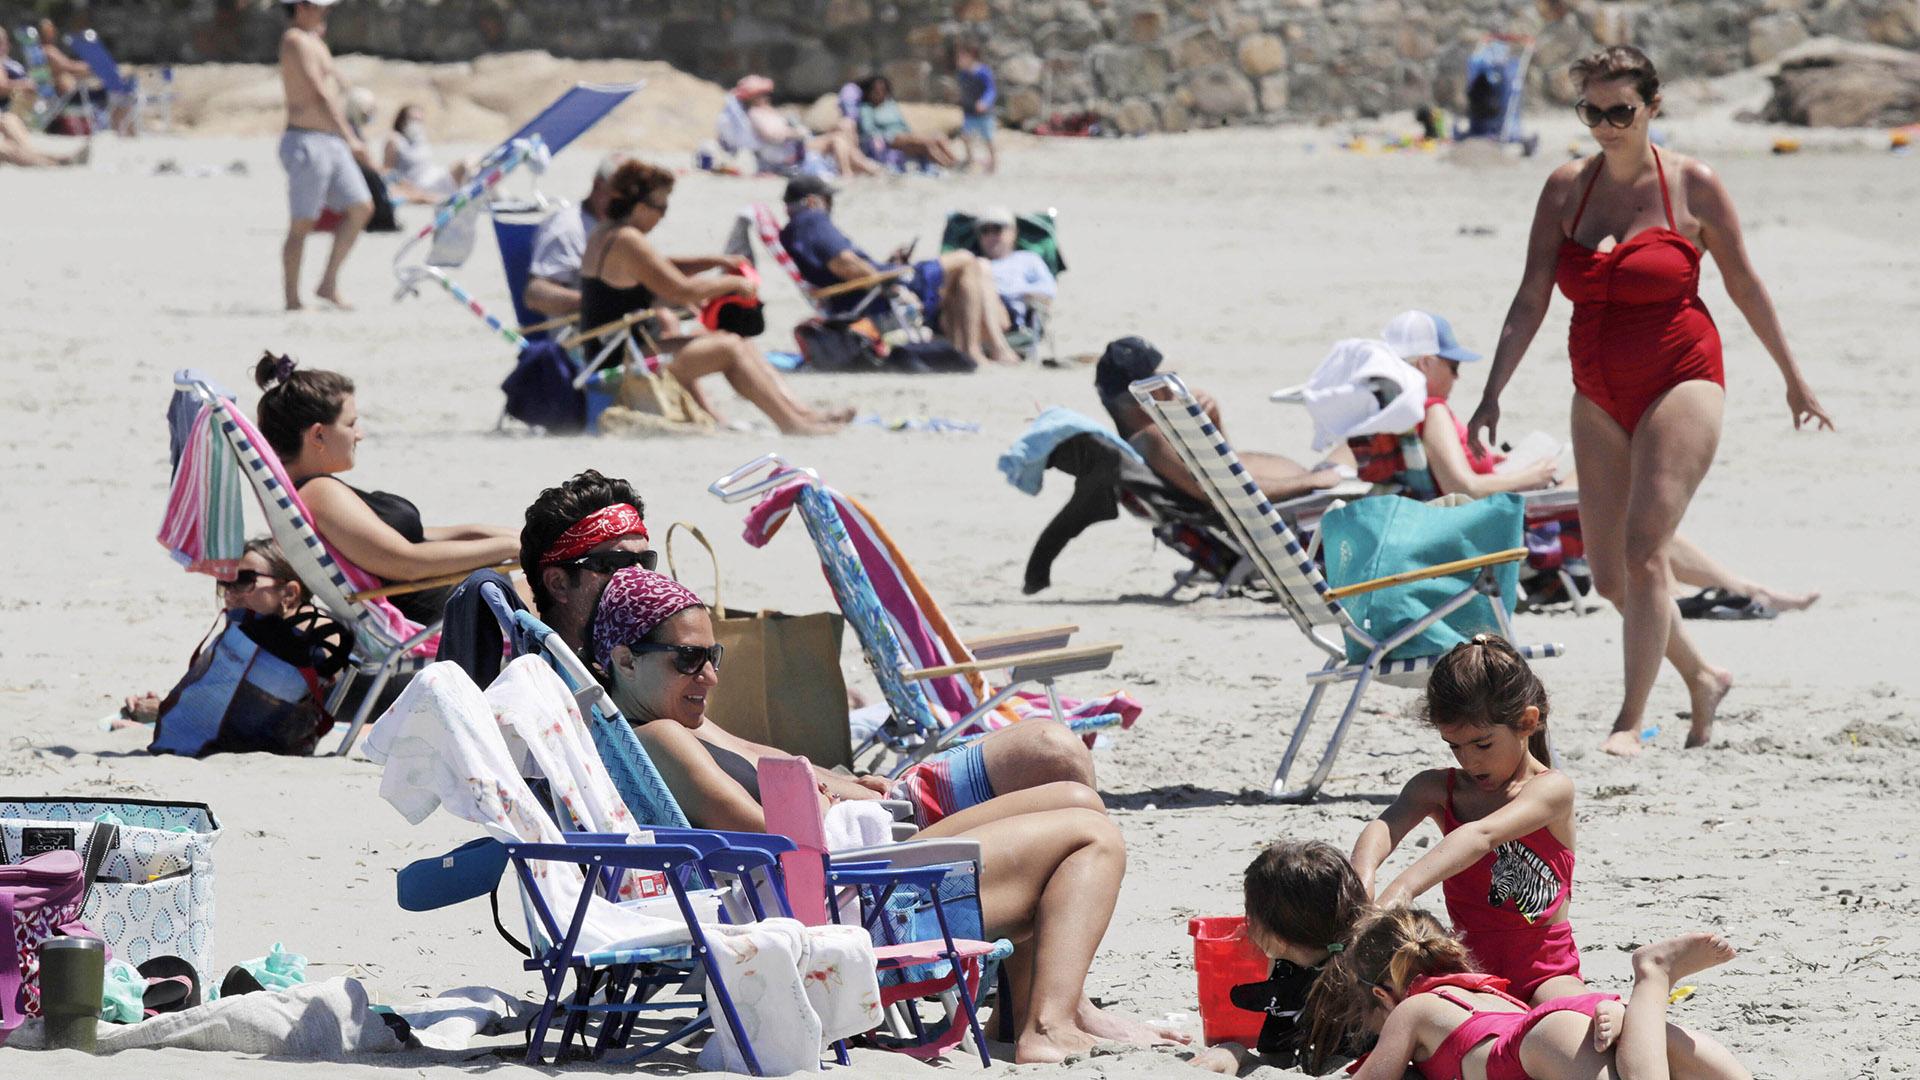 Beachgoers relax on the shore at Good Harbor Beach in Gloucester, Mass., Friday, May 22, 2020. Beaches in Gloucester reopened with restrictions on Friday after being closed two months ago due to the pandemic. (AP Photo / Charles Krupa)